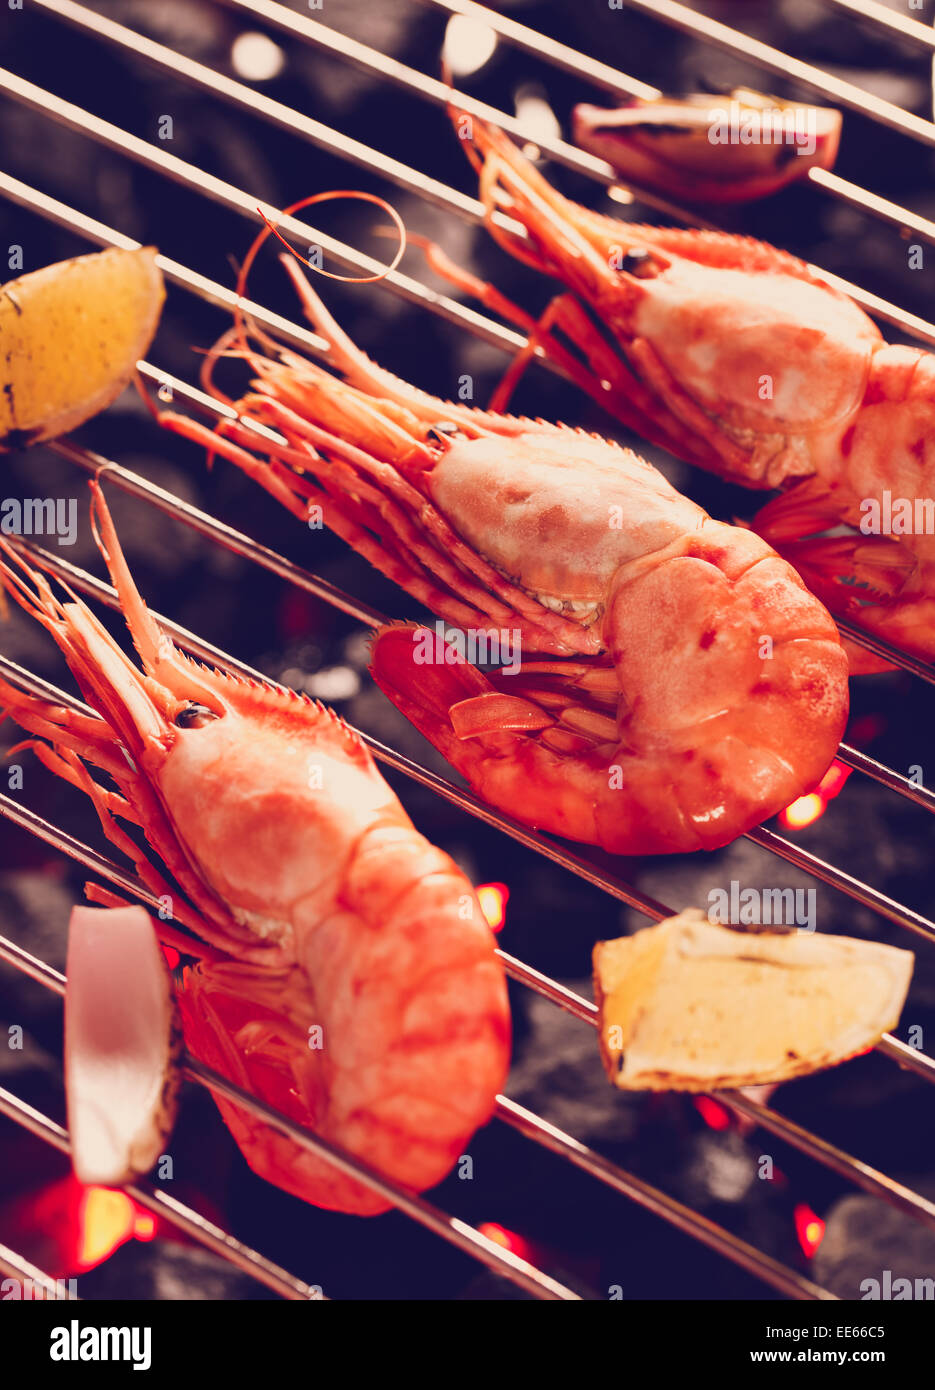 Shrimp on a grill with instagram style filter Stock Photo